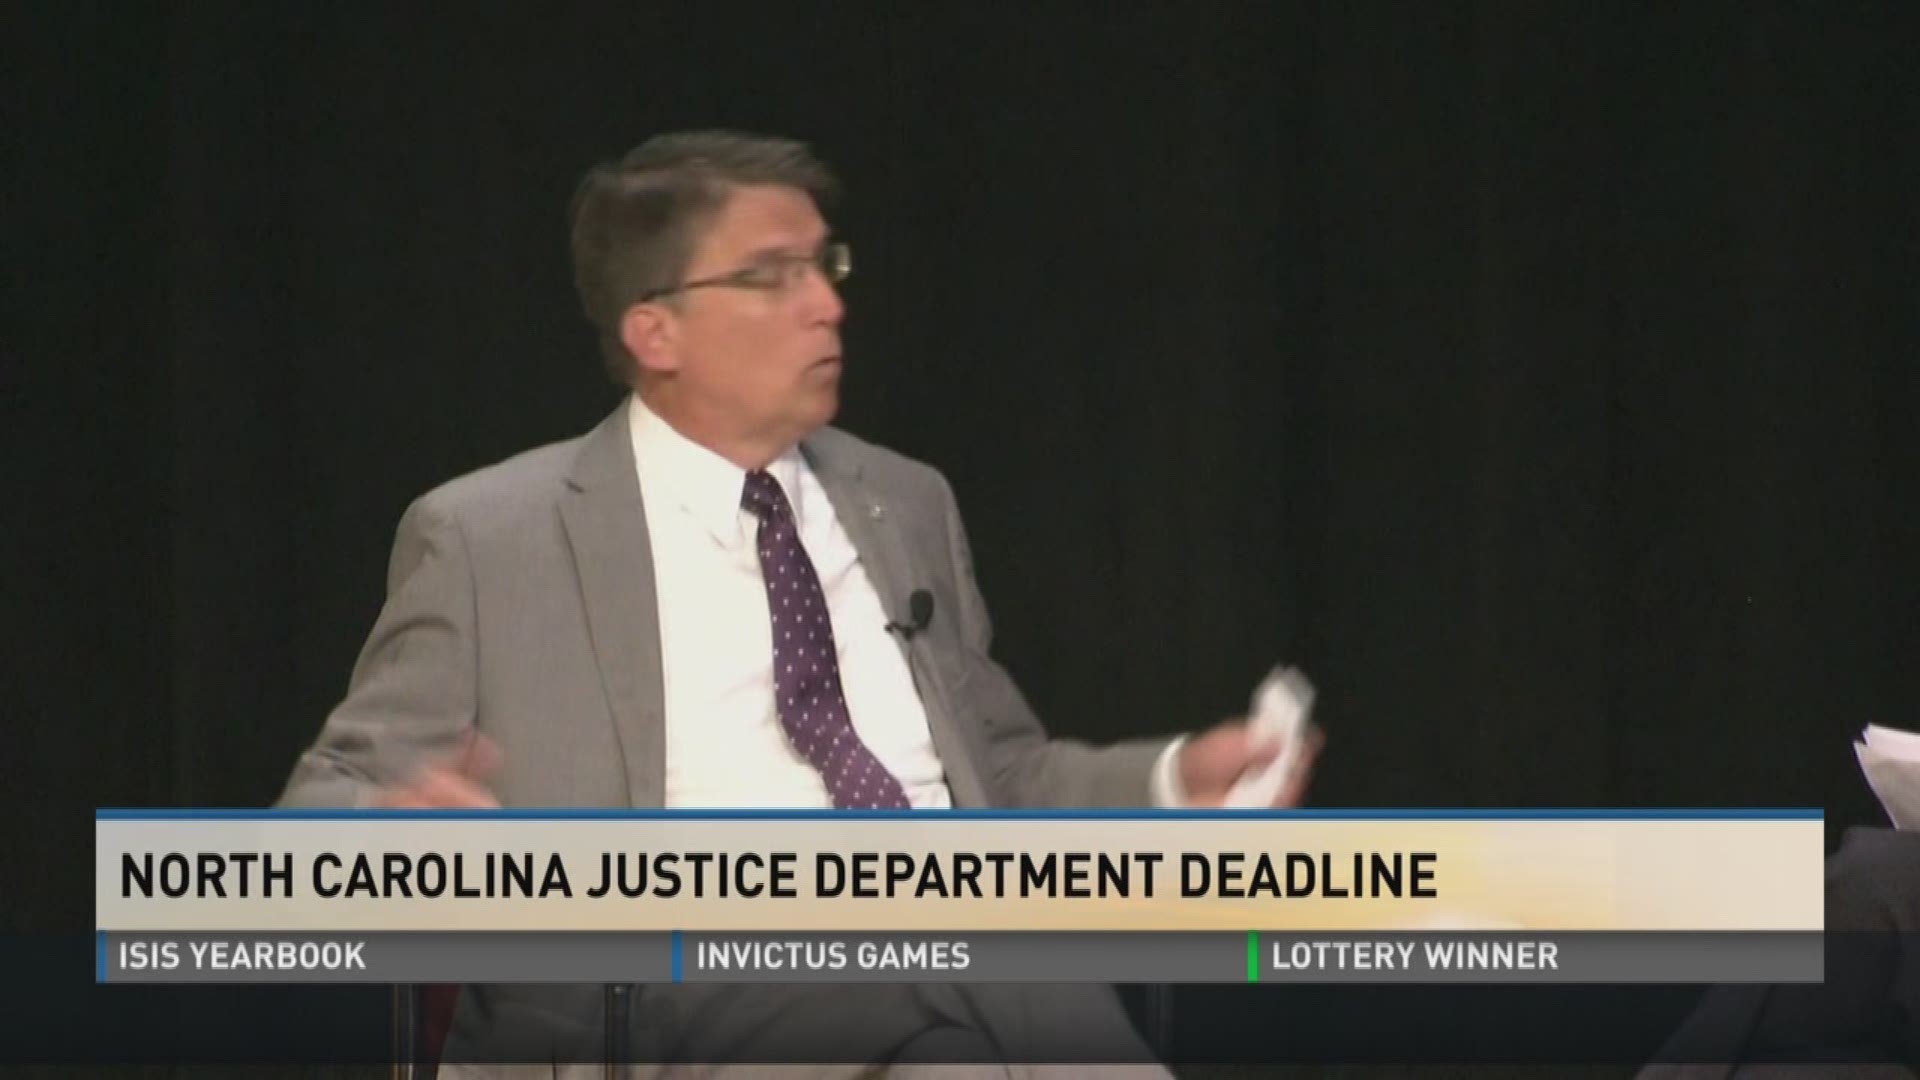 The U.S. Justice Department sent a letter to North Carolina Gov. Pat McCrory saying the HB2 law violates the federal Civil Rights Act and Title IX.